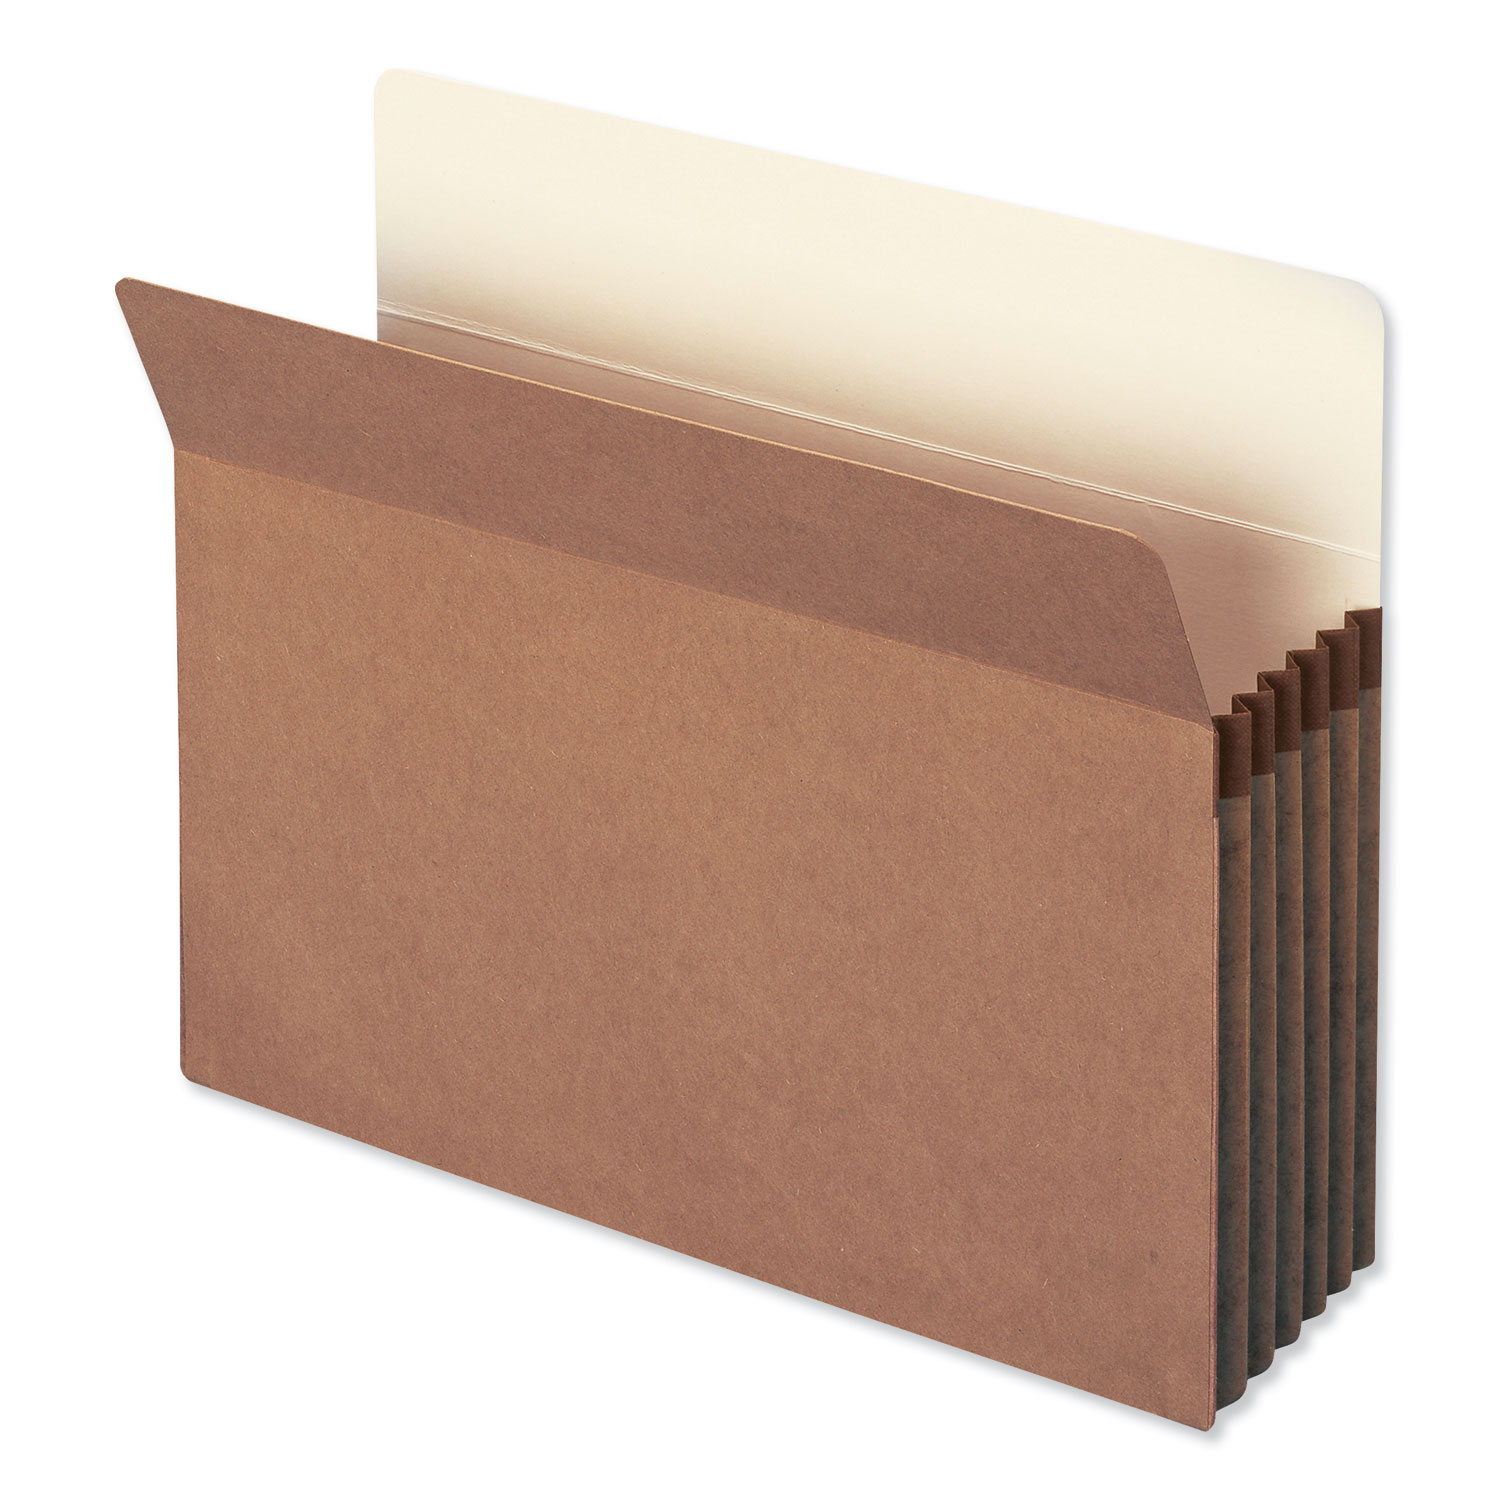  Smead 73810 Redrope Drop Front File Pockets, 5.25 Expansion, Letter Size, Redrope, 50/Box (SMD73810) 